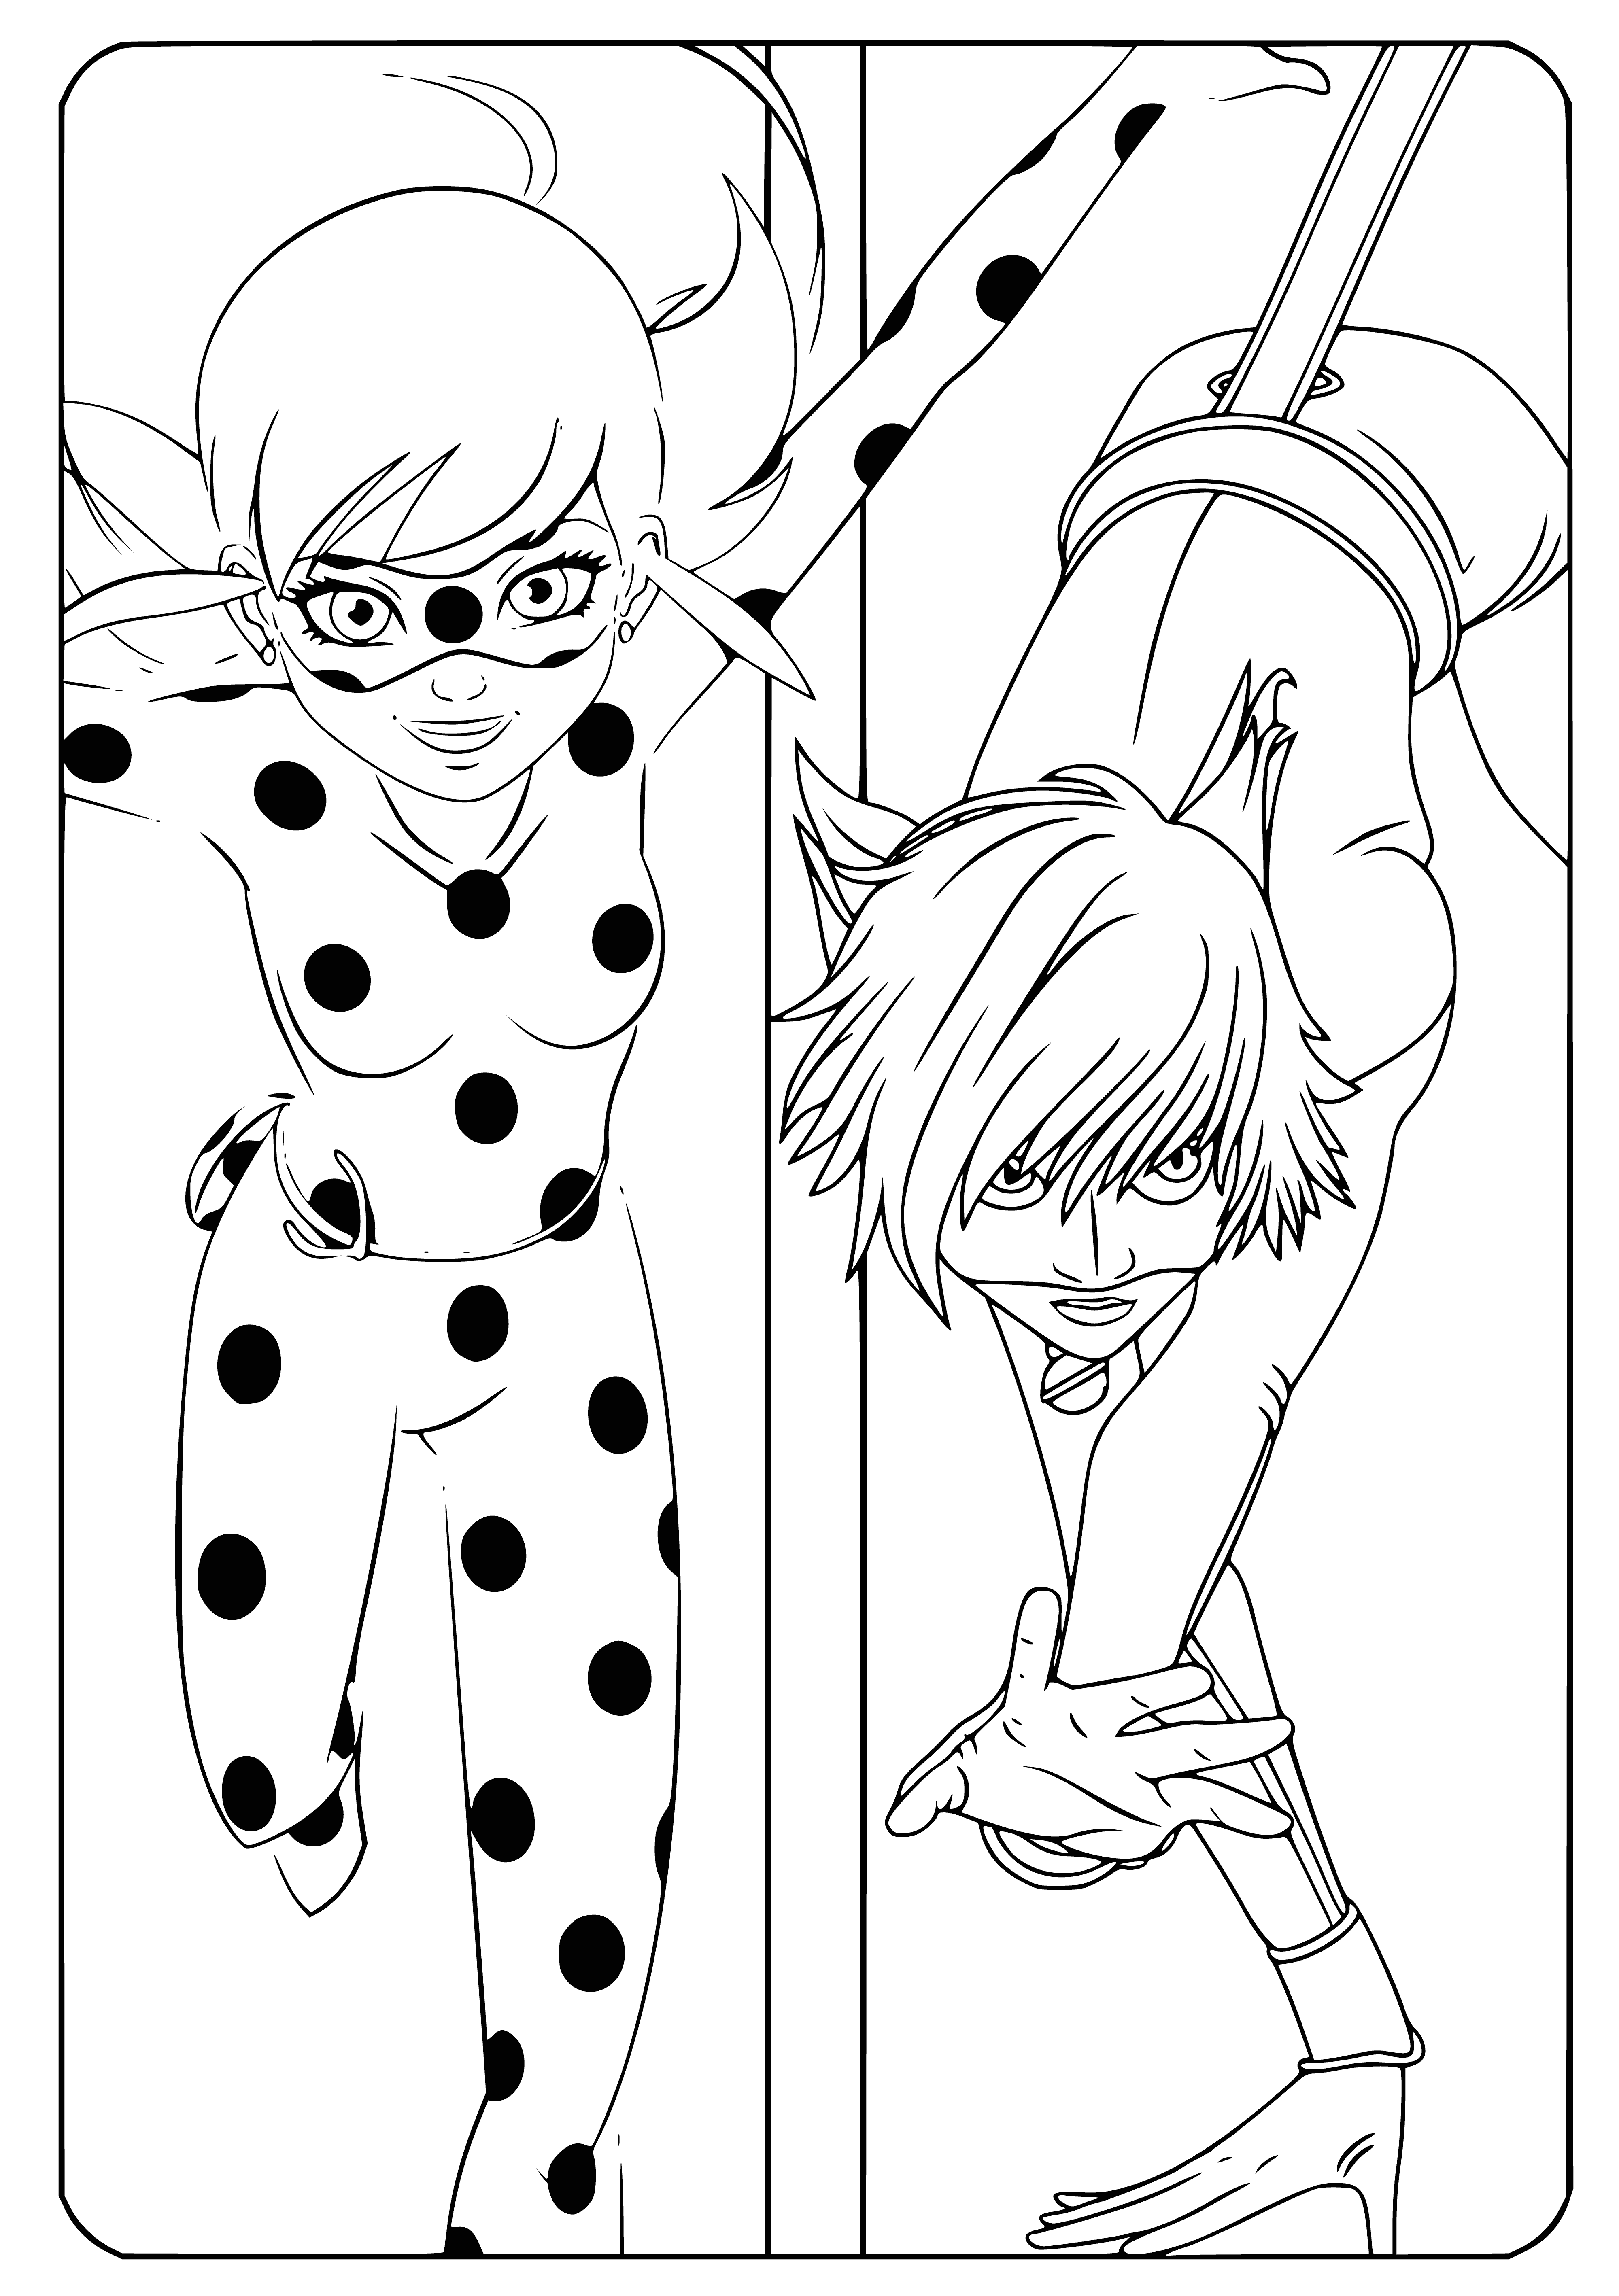 coloring page: Big red ladybug, small black cat with white spots, on yellow flower—both have black eyes.